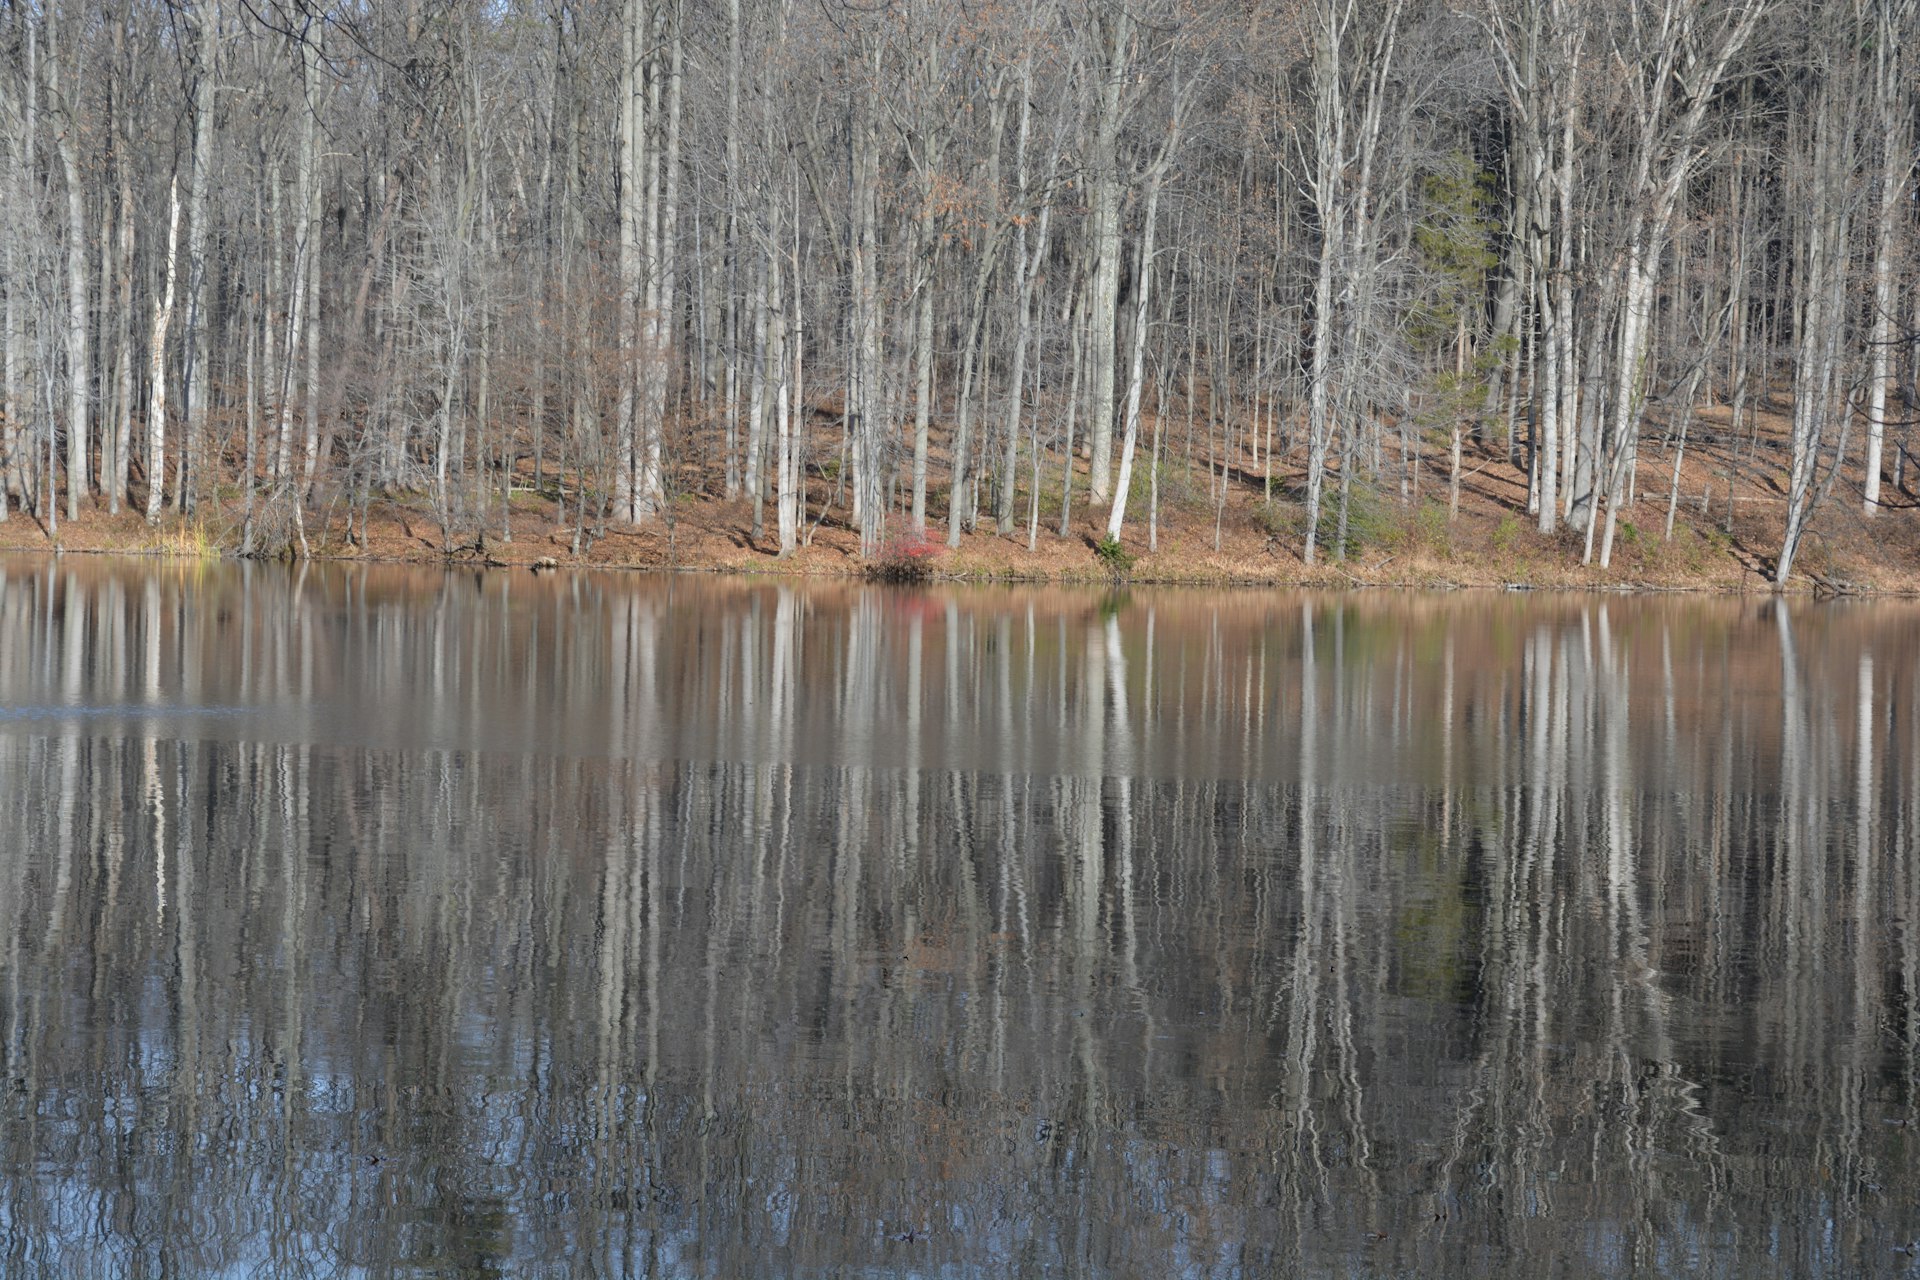 A woodland viewed from across a body of water. The trees are tightly packed together